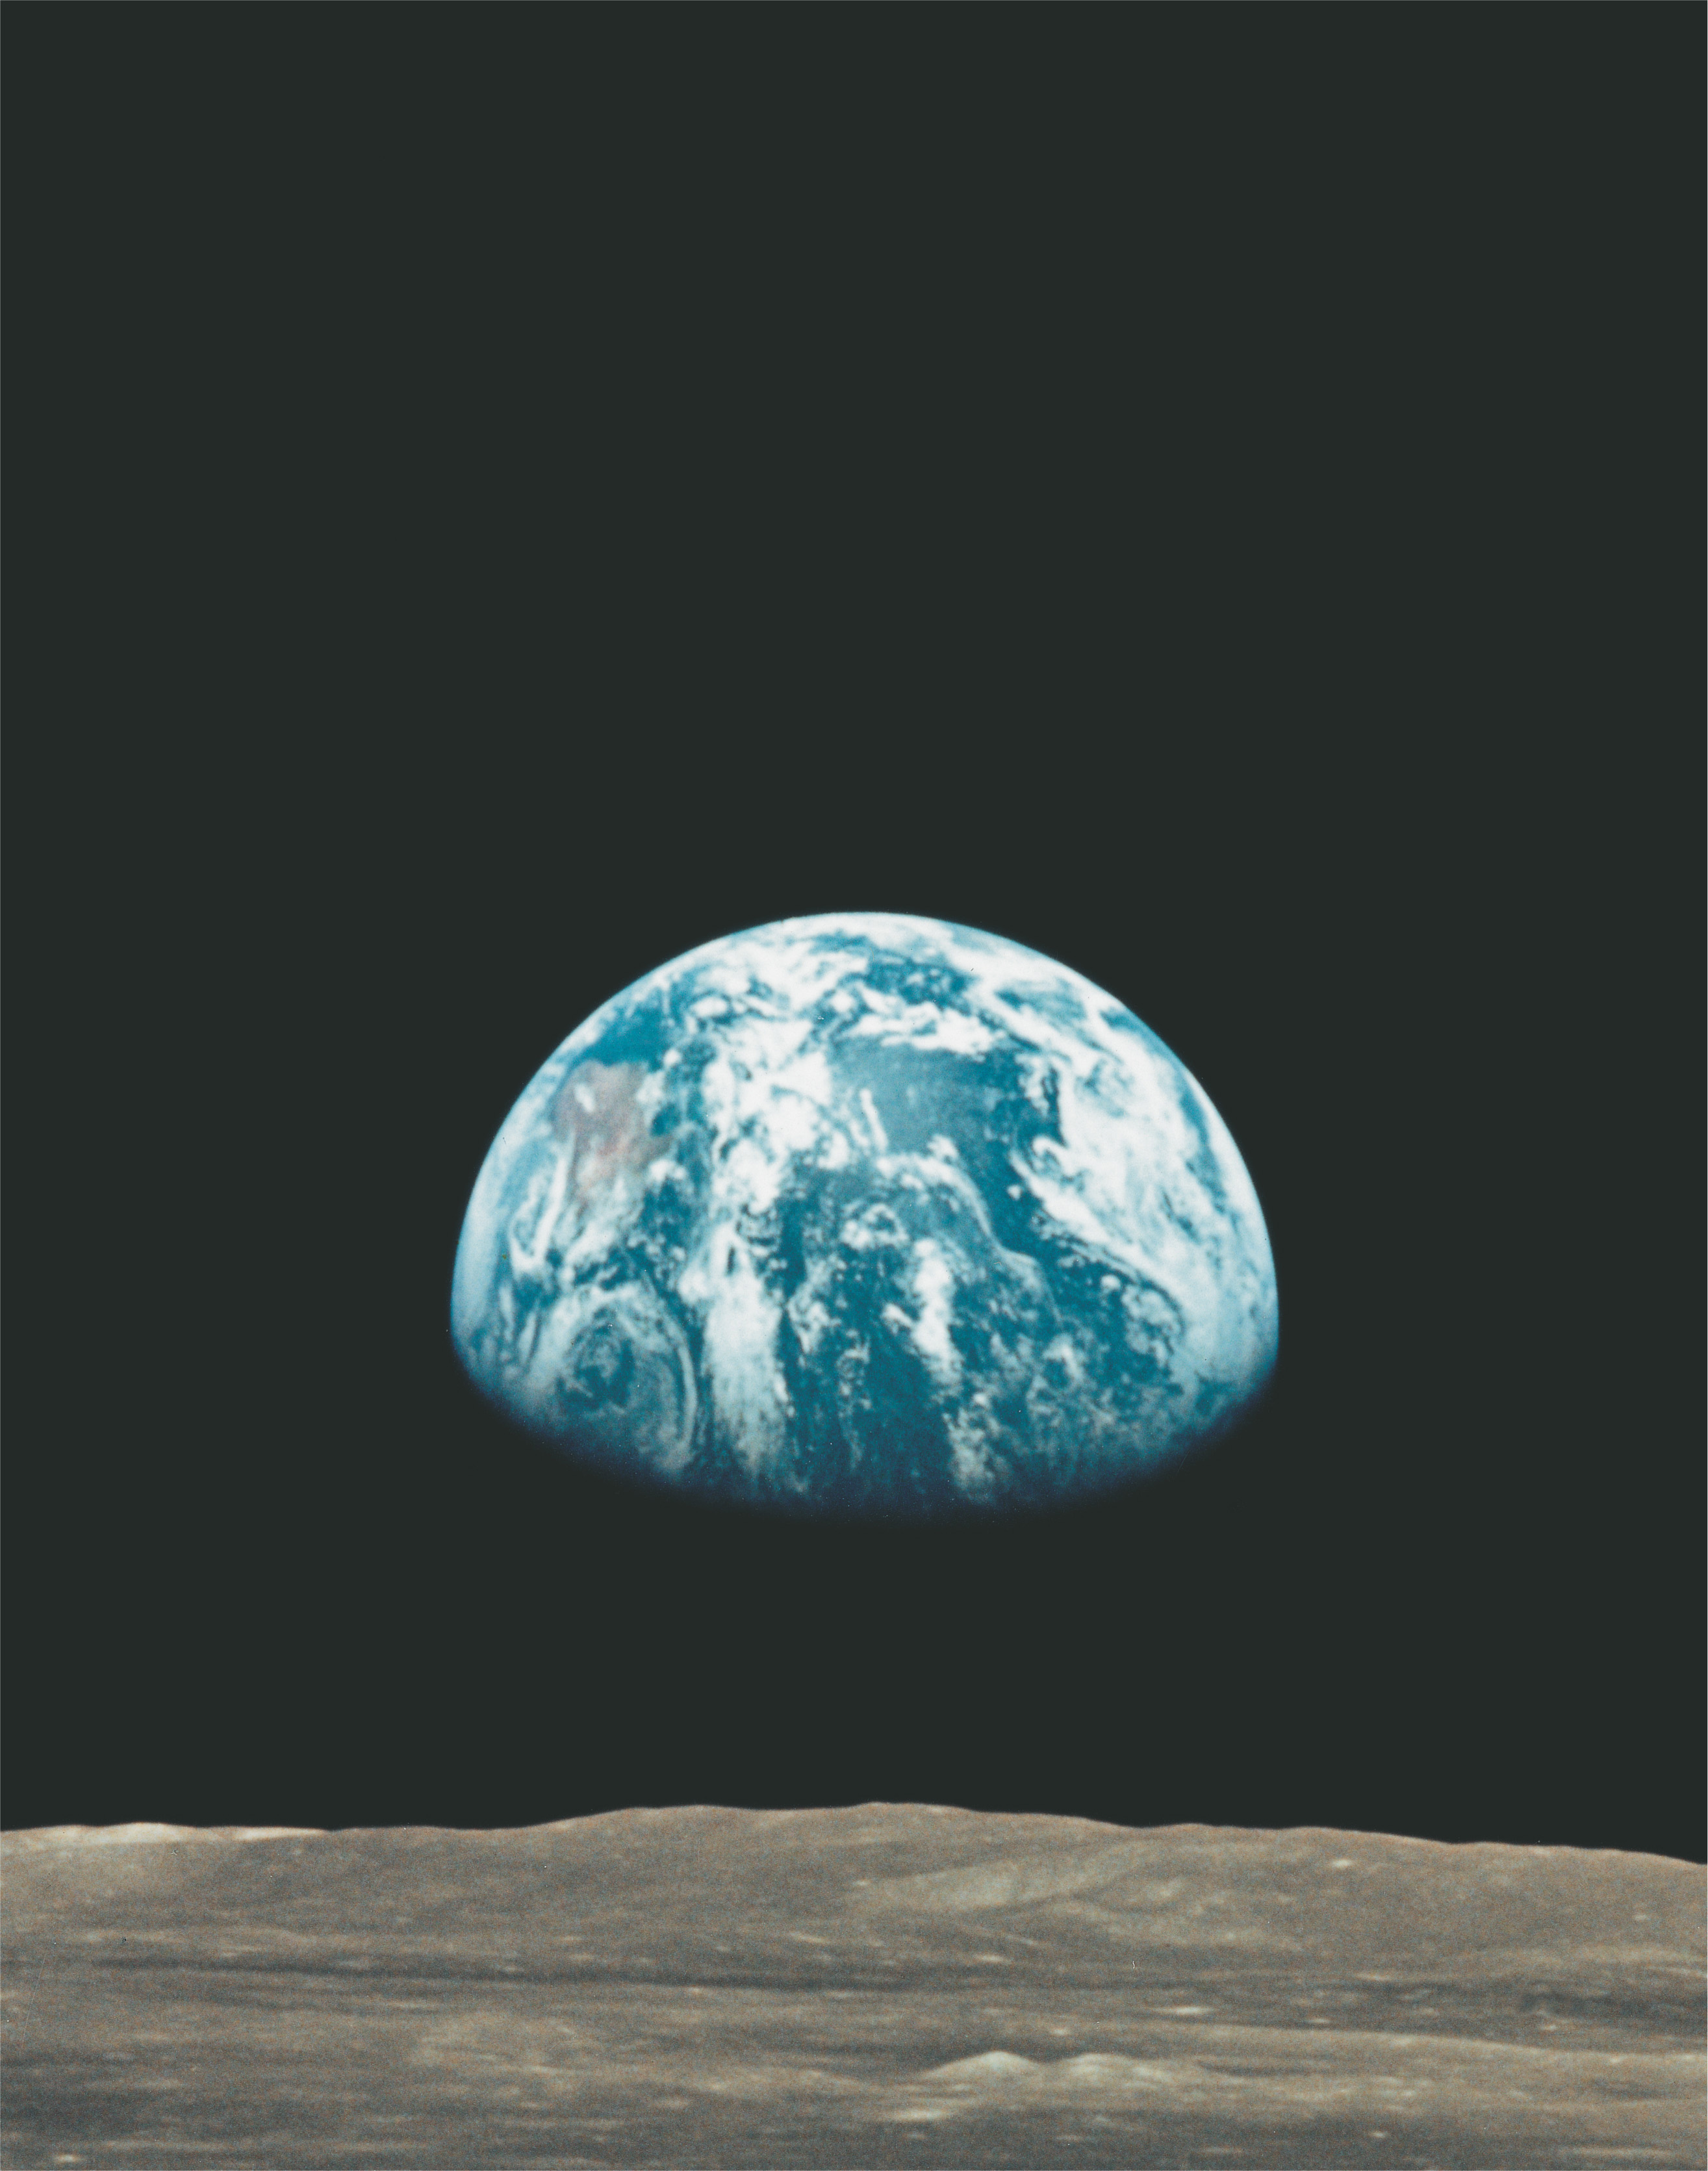 a view of Earth in space from the moon